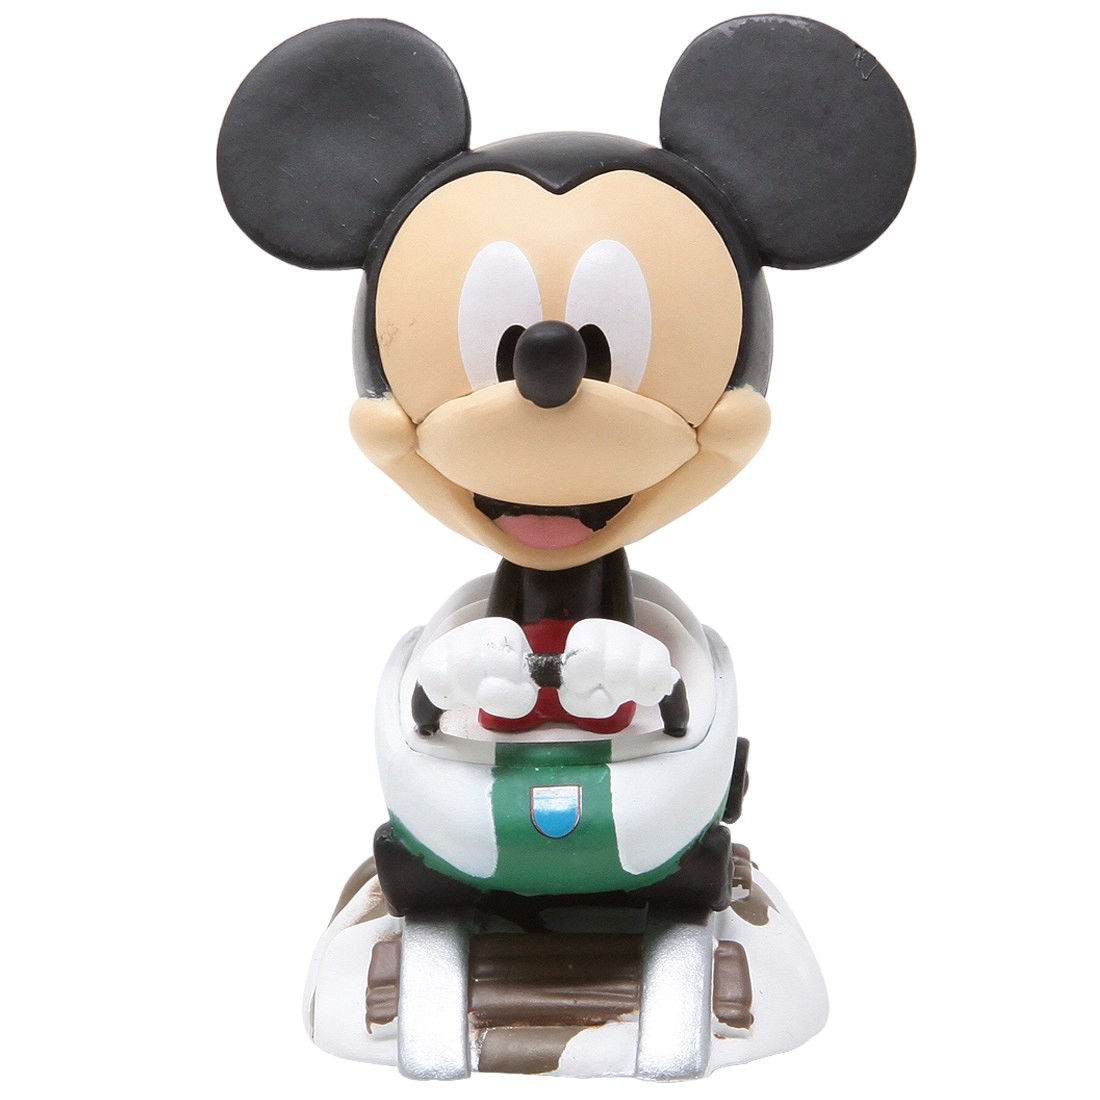 Funko Disney 65th Anniversary Mini Vinyl Figure - 03 Micky Mouse At The Matterhorn Bobsleds Attraction (black)